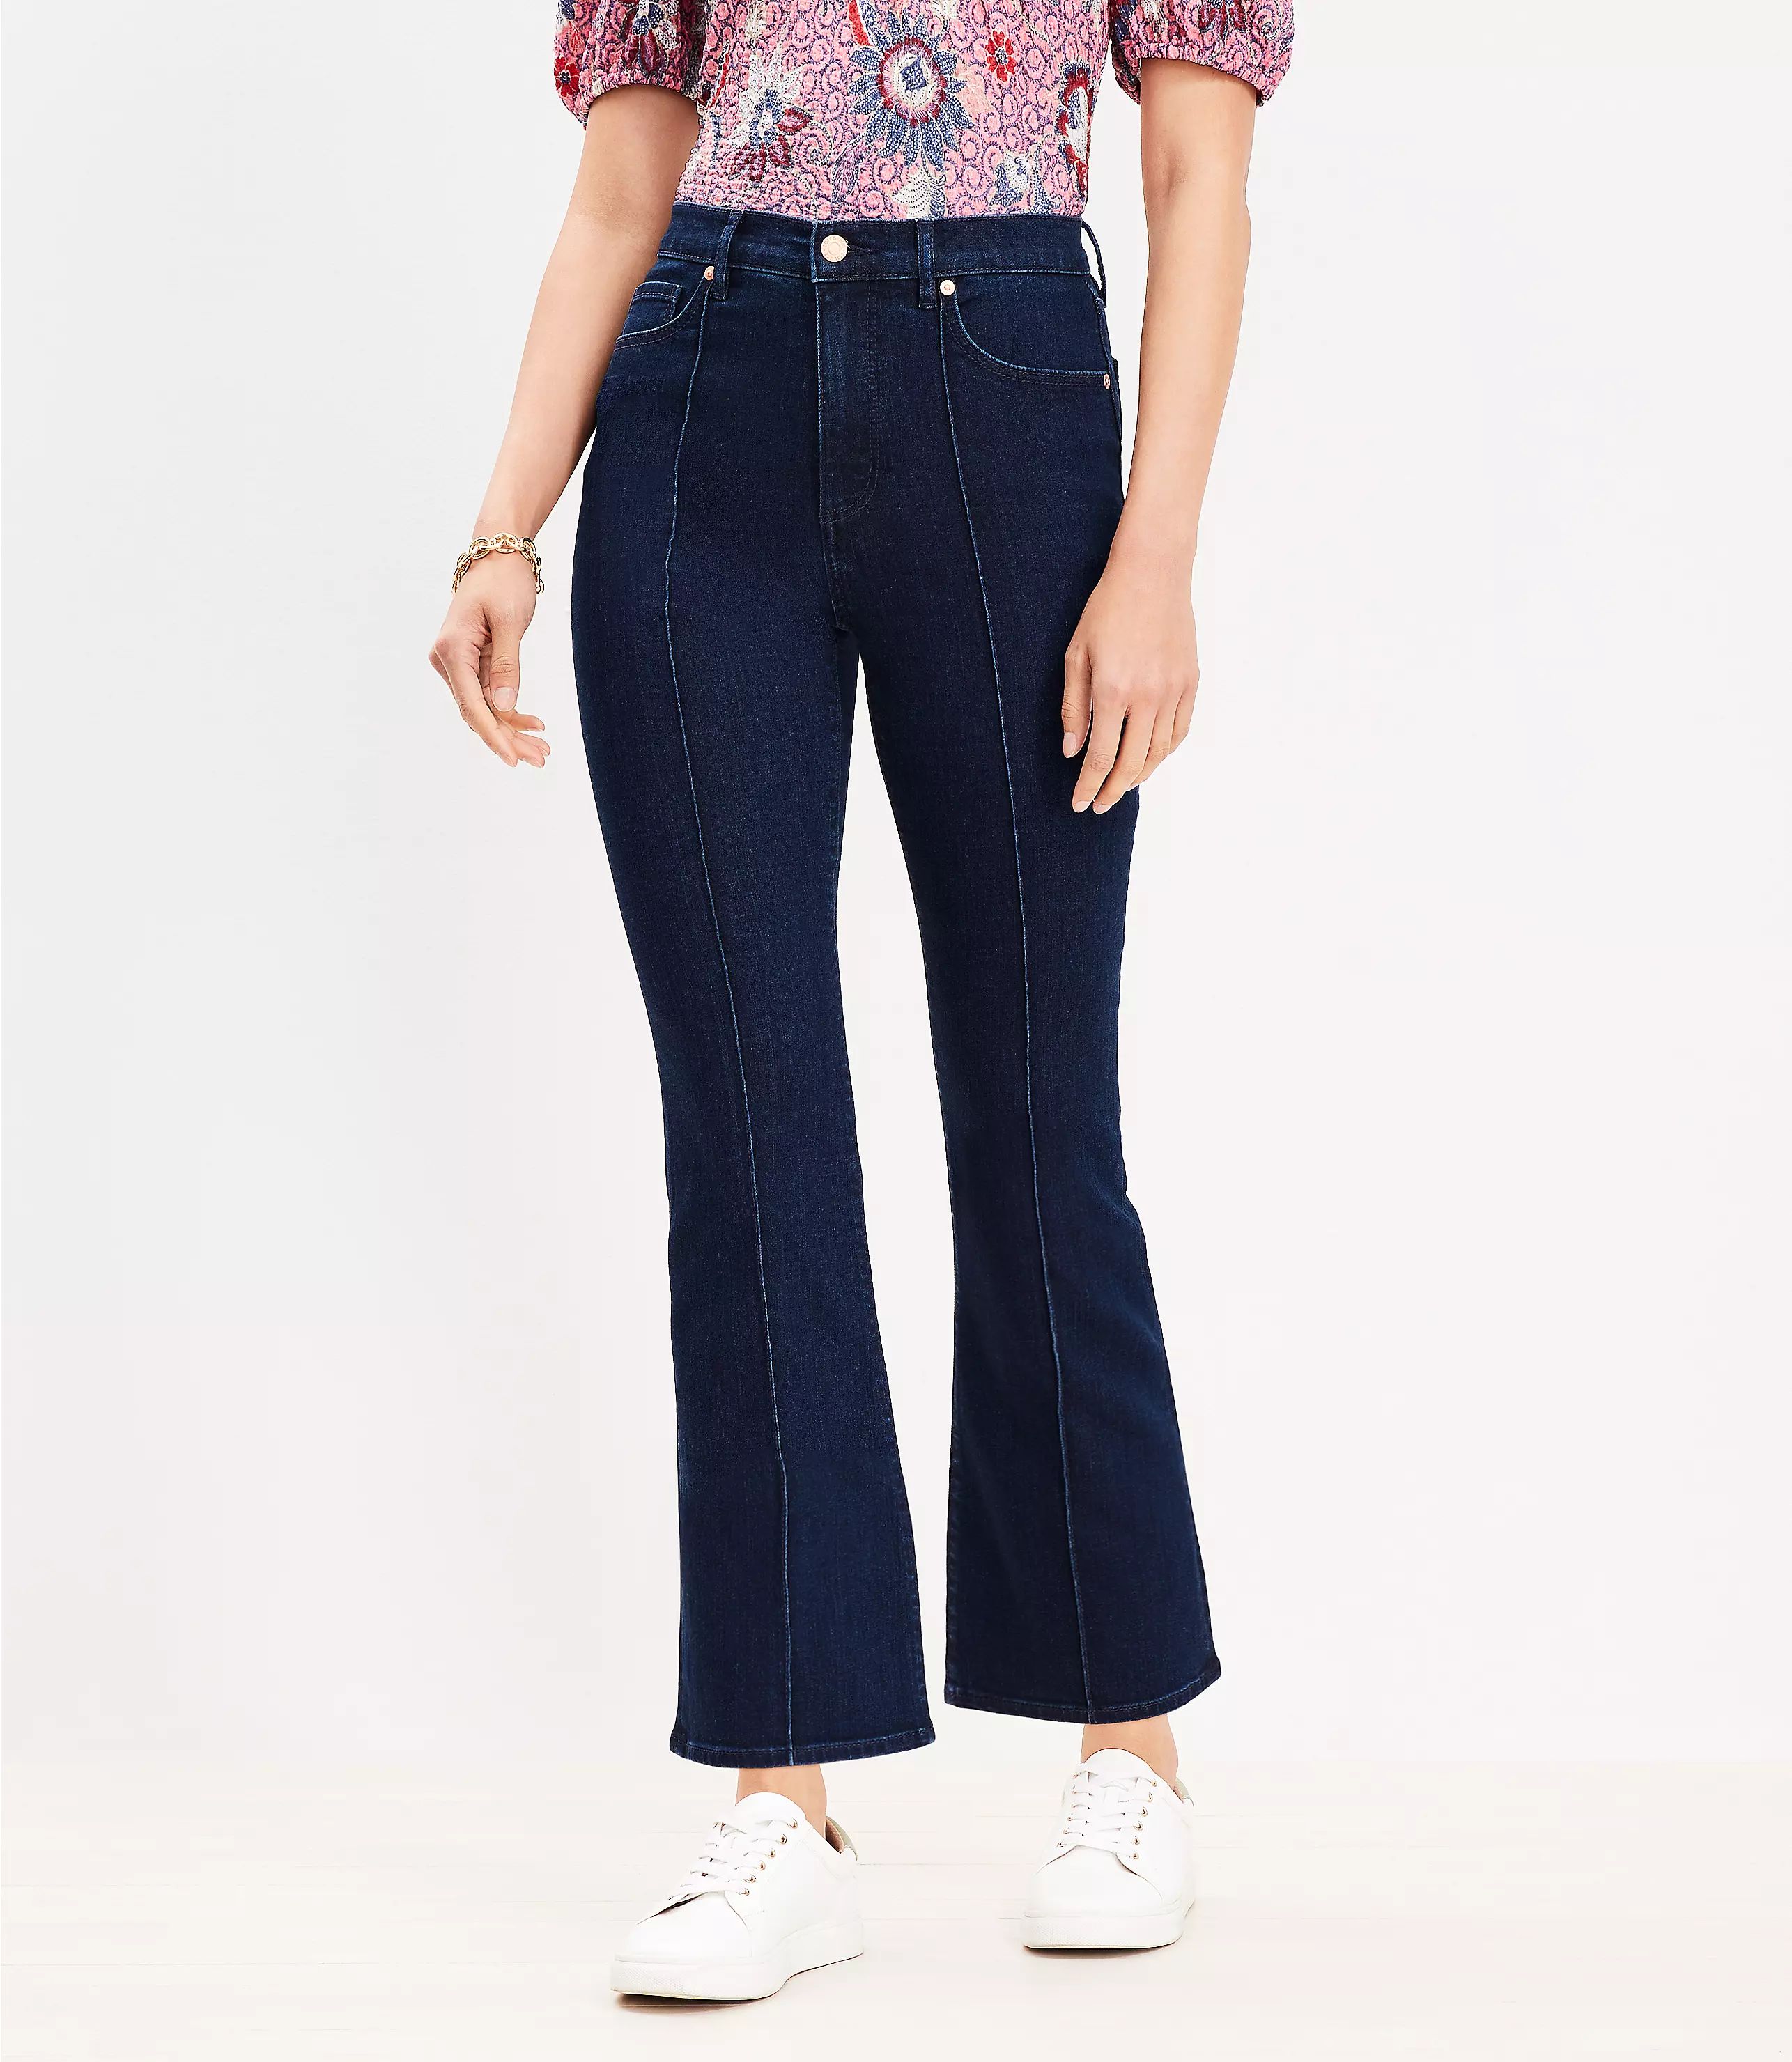 Petite Pintucked High Rise Kick Crop Jeans in Classic Rinse Wash | LOFT